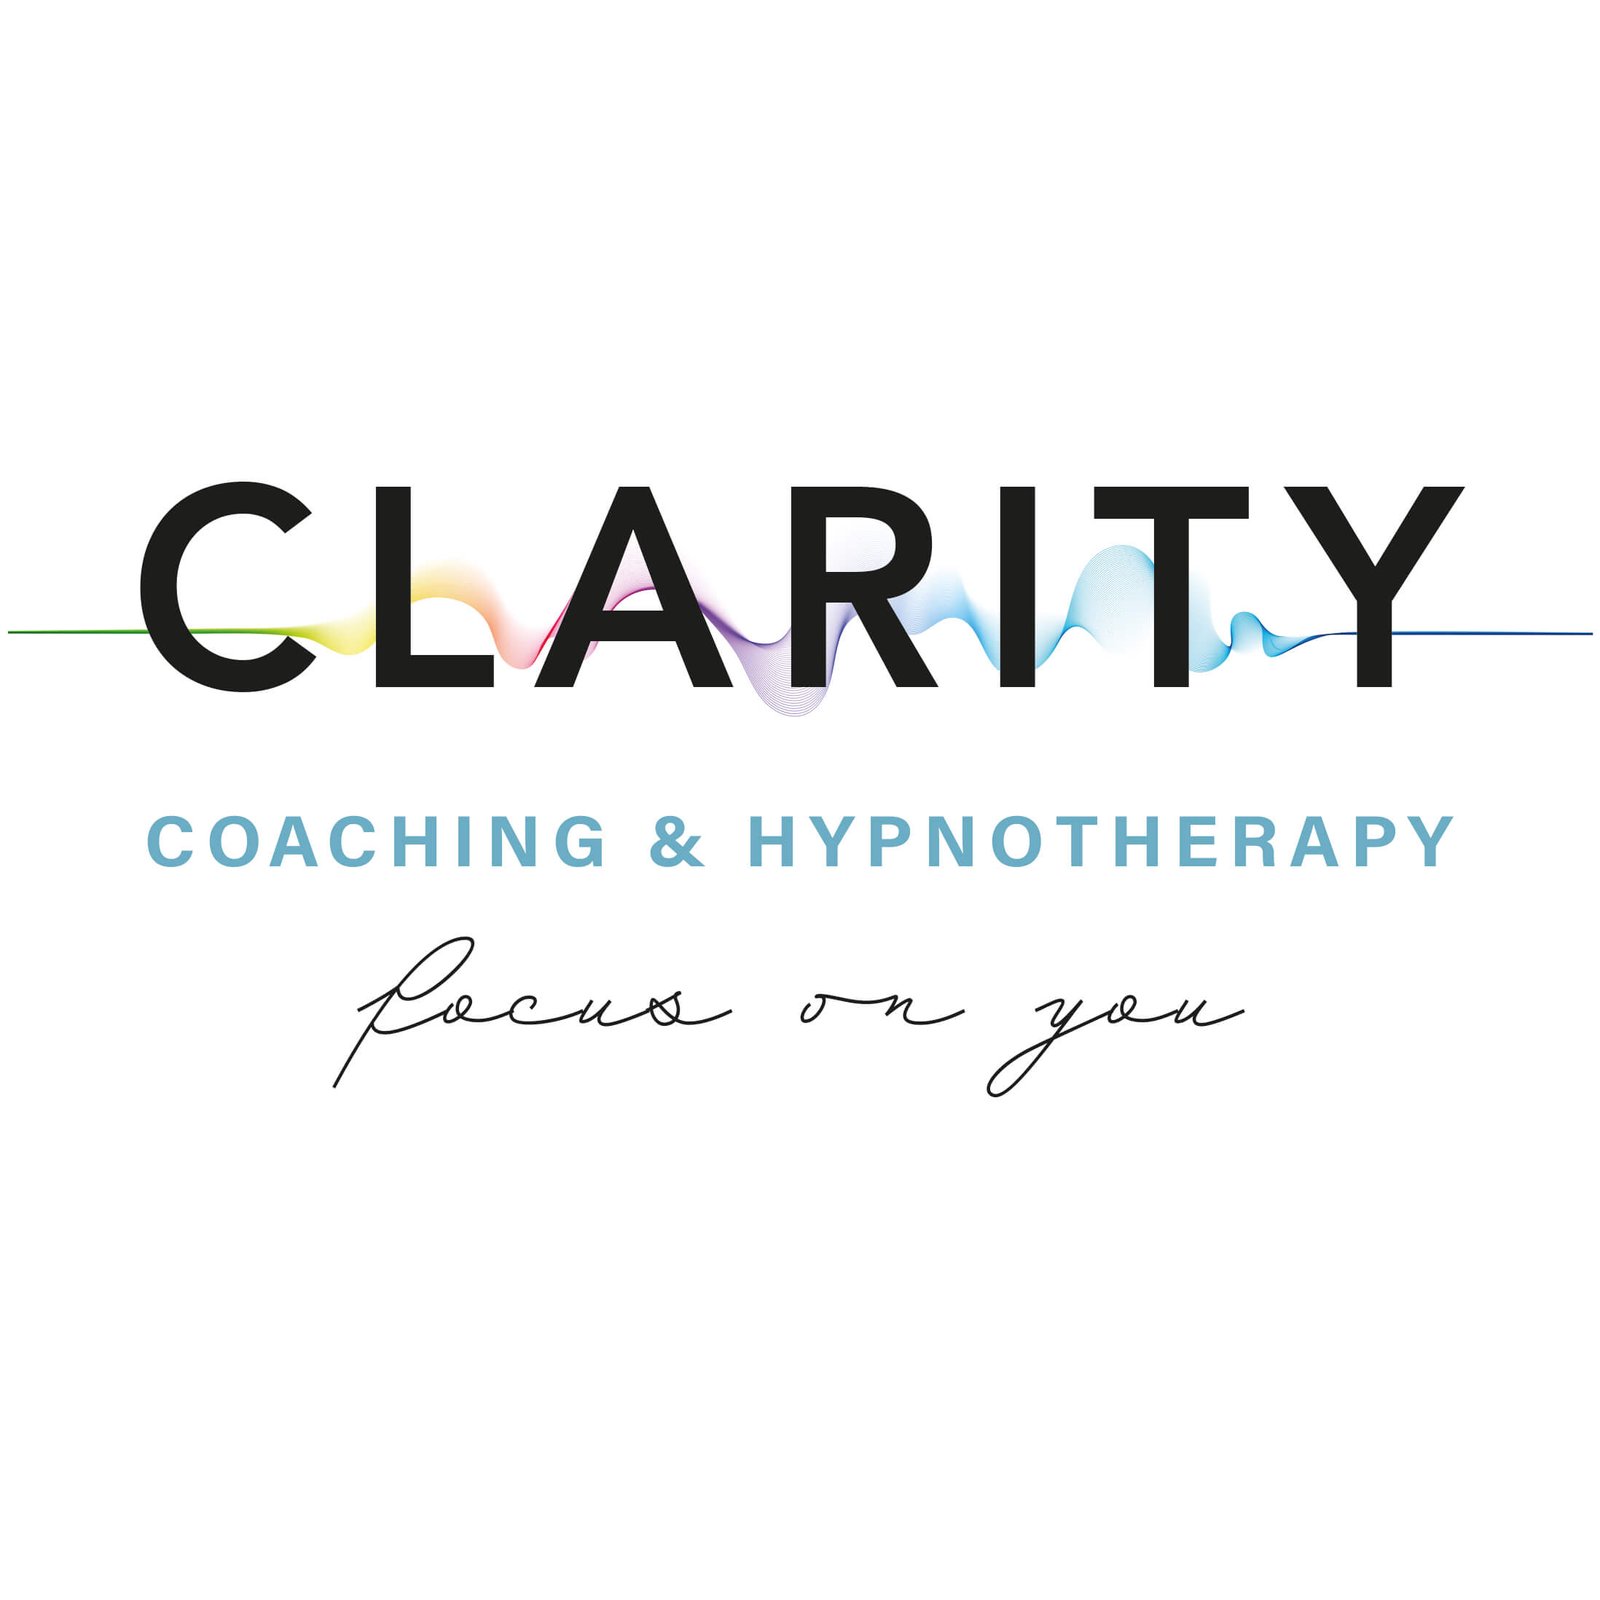 Clarity Coaching & Hypnotherapy